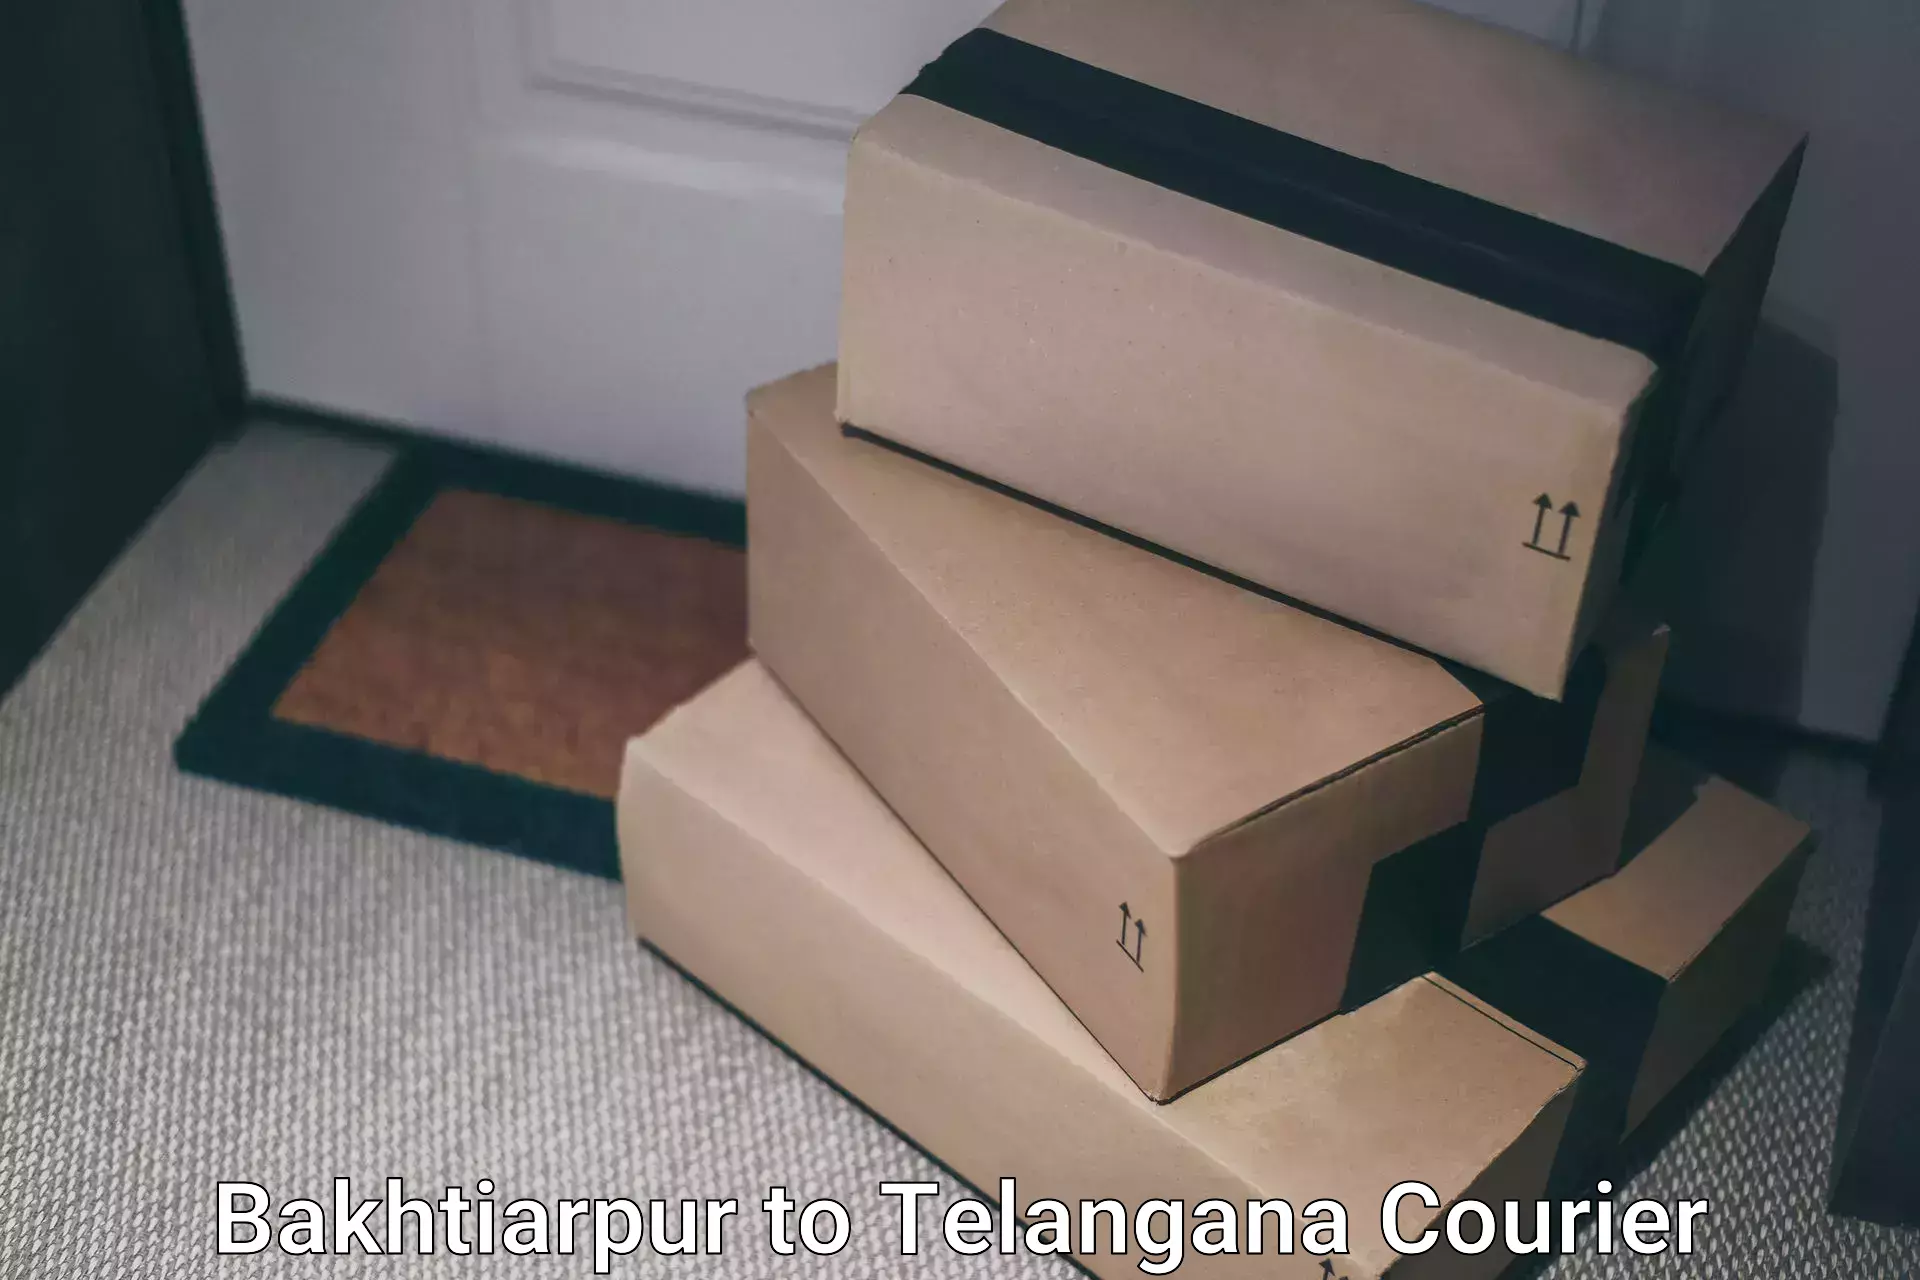 24-hour courier services in Bakhtiarpur to Bhupalpally